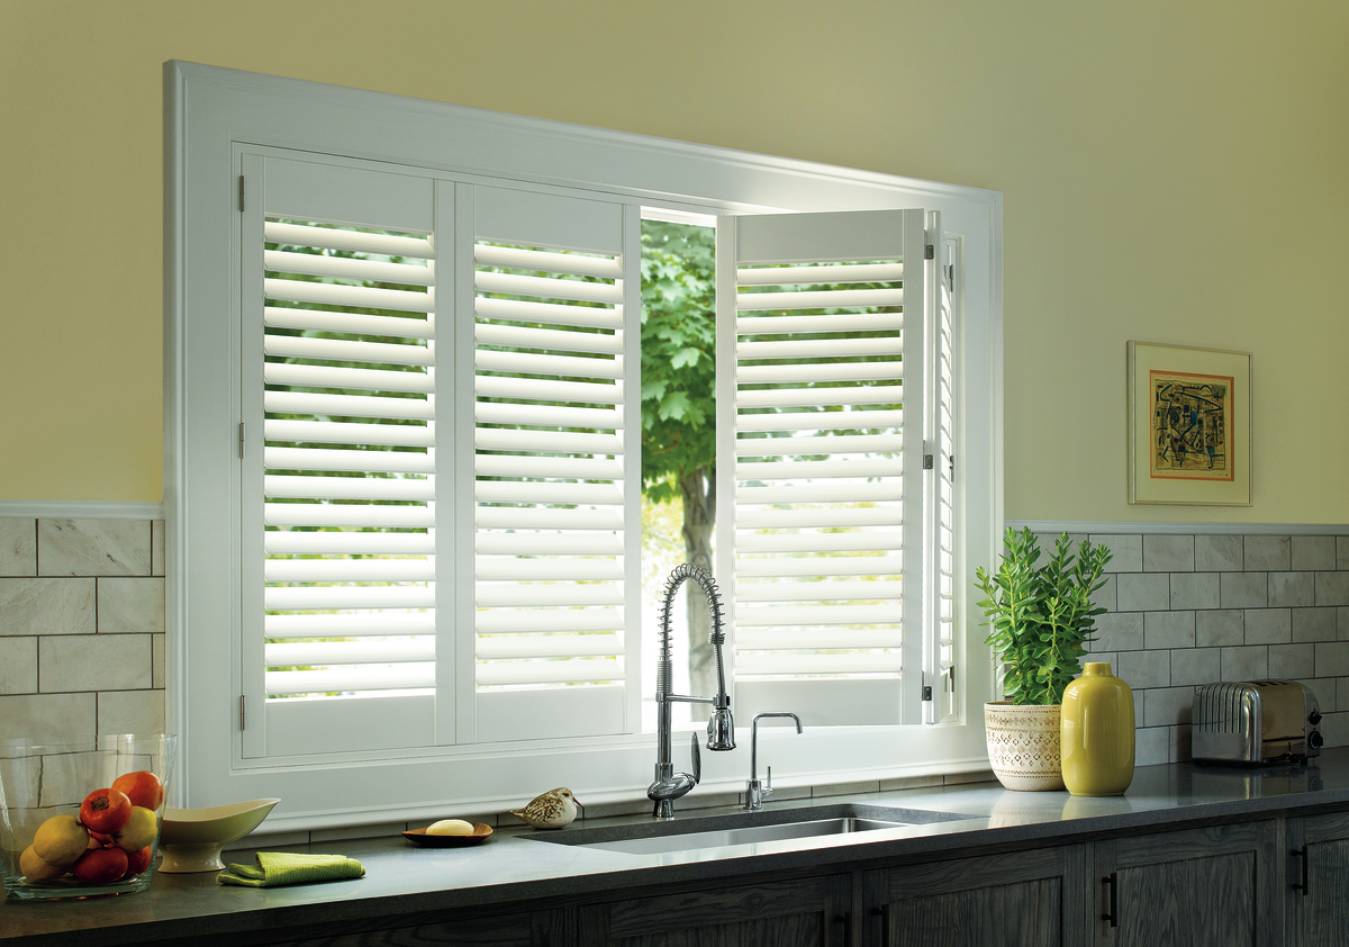 Palm Beach™ Polysatin™ Shutters San Diego, California (CA) modern shutters with modern style for your home